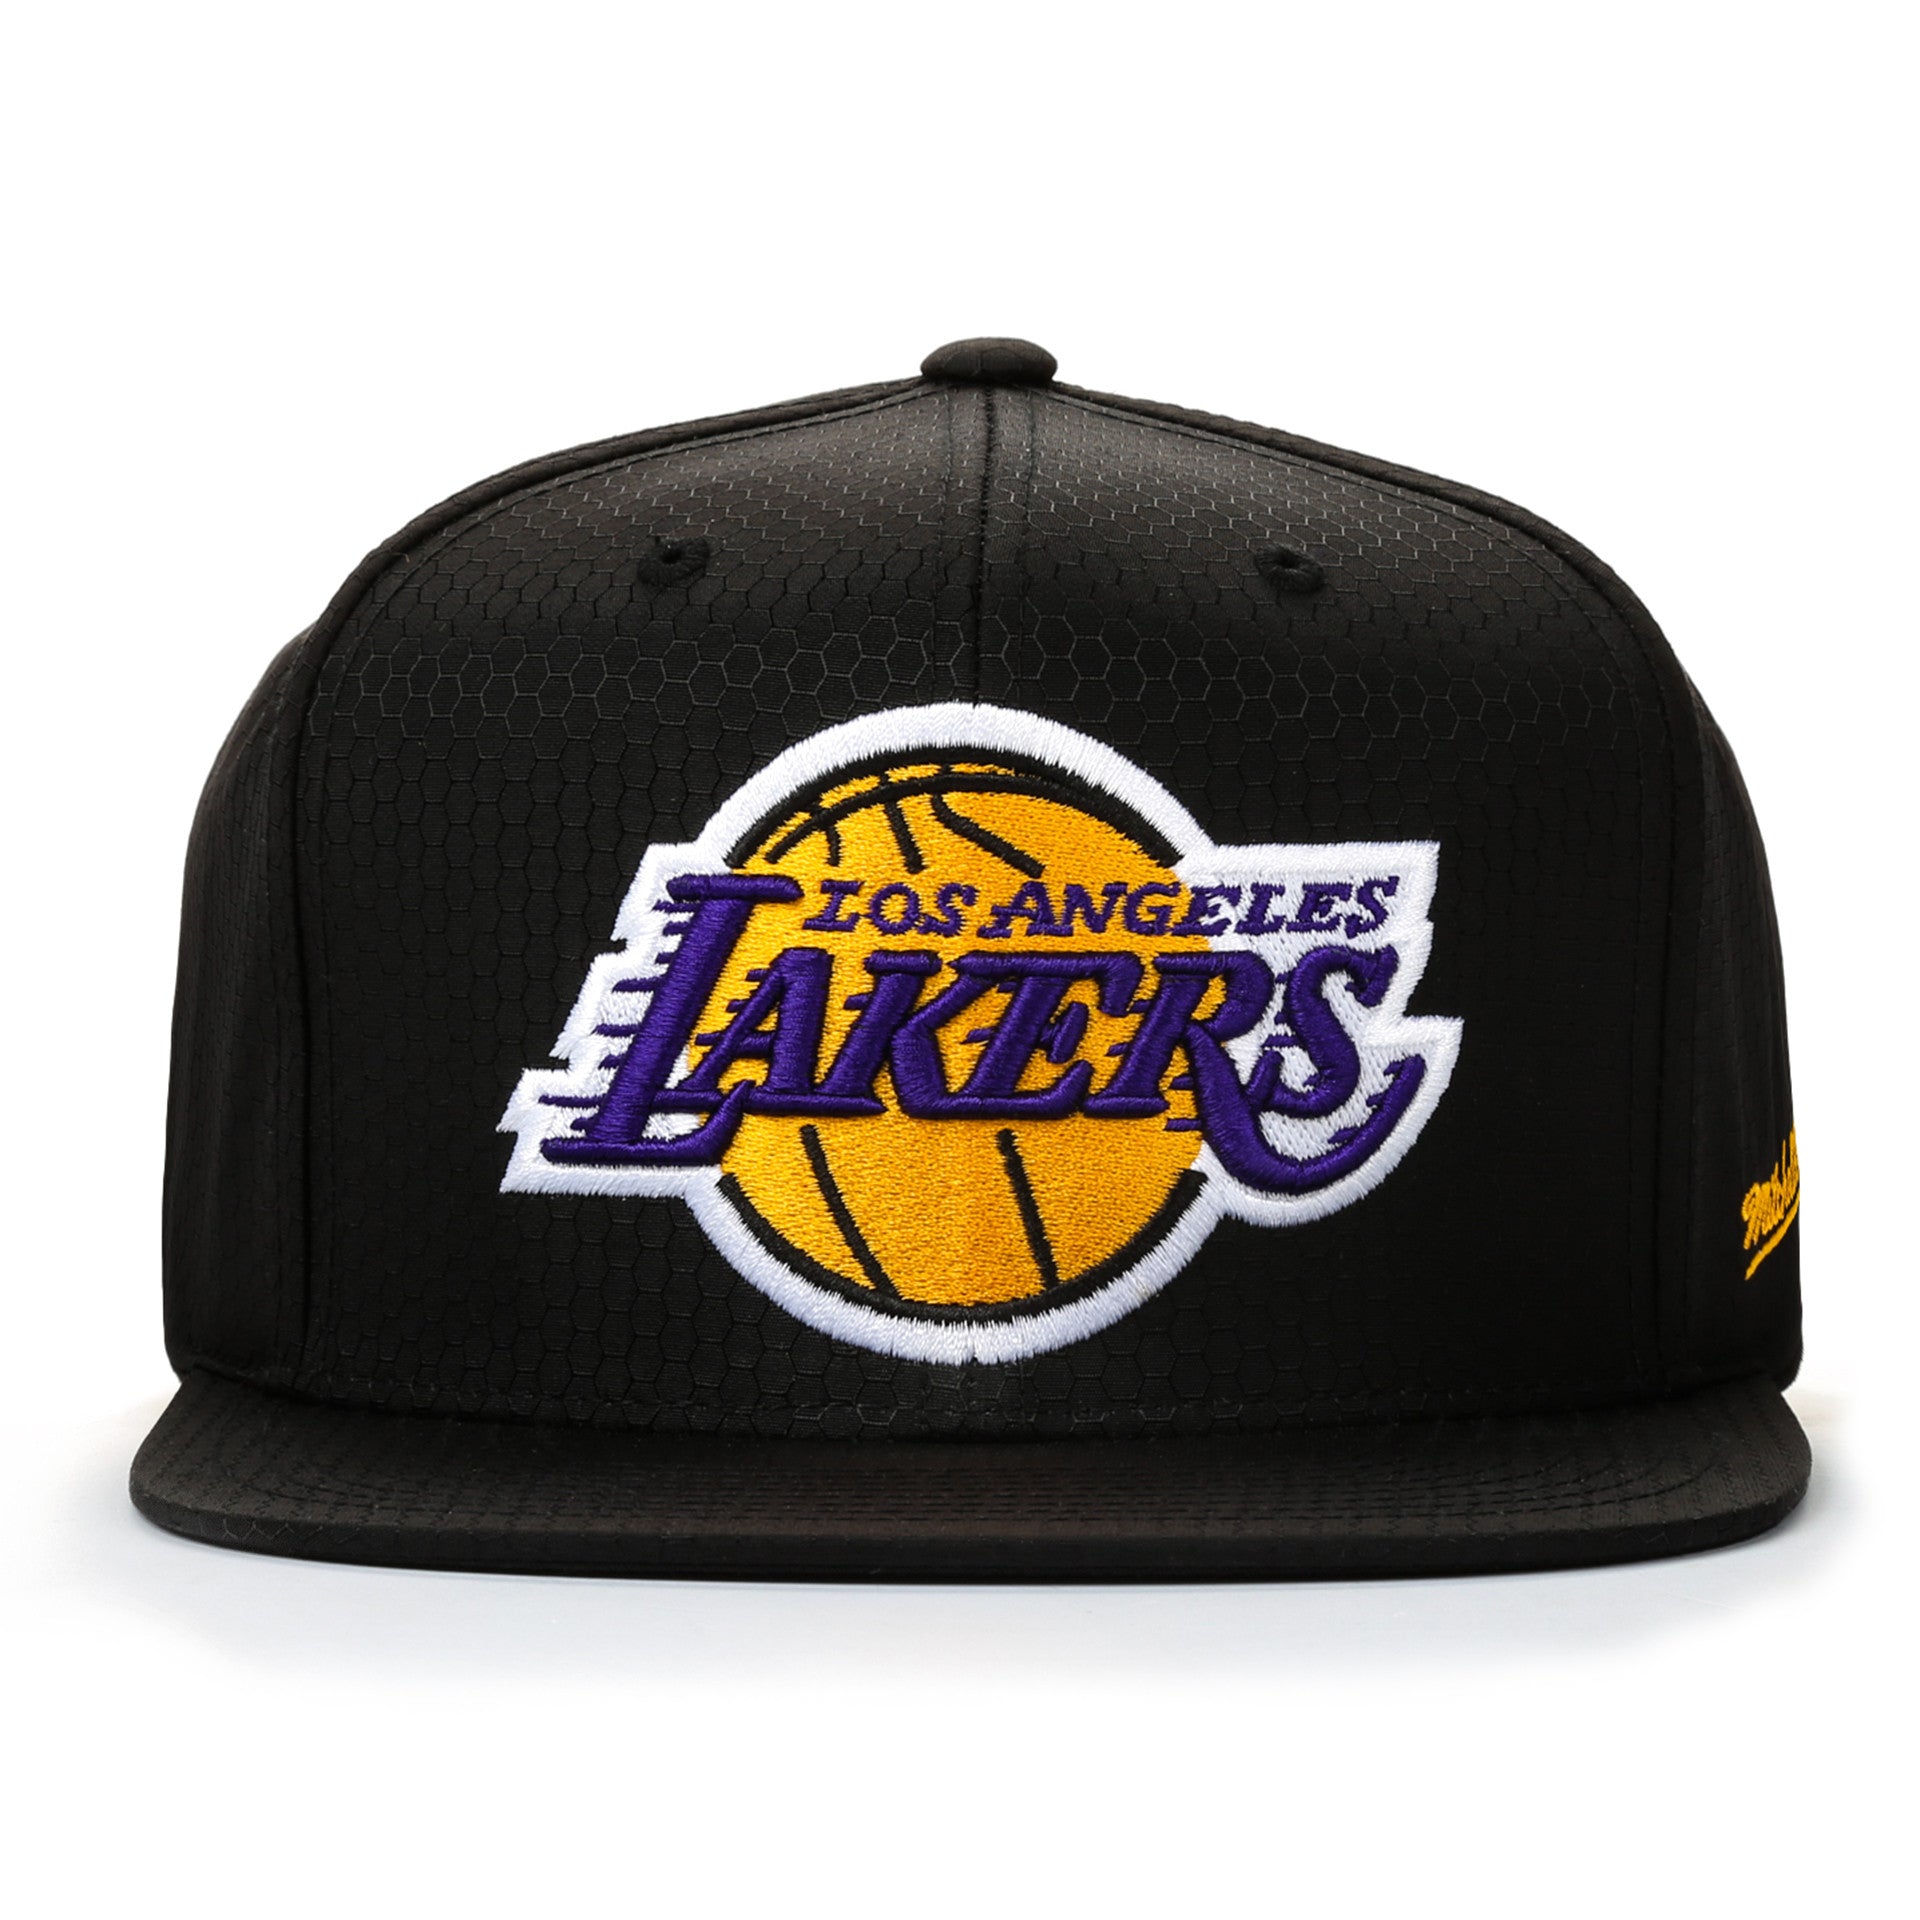 Mitchell and Ness Los Angeles Lakers Logo Gold/Black Snapback Hat